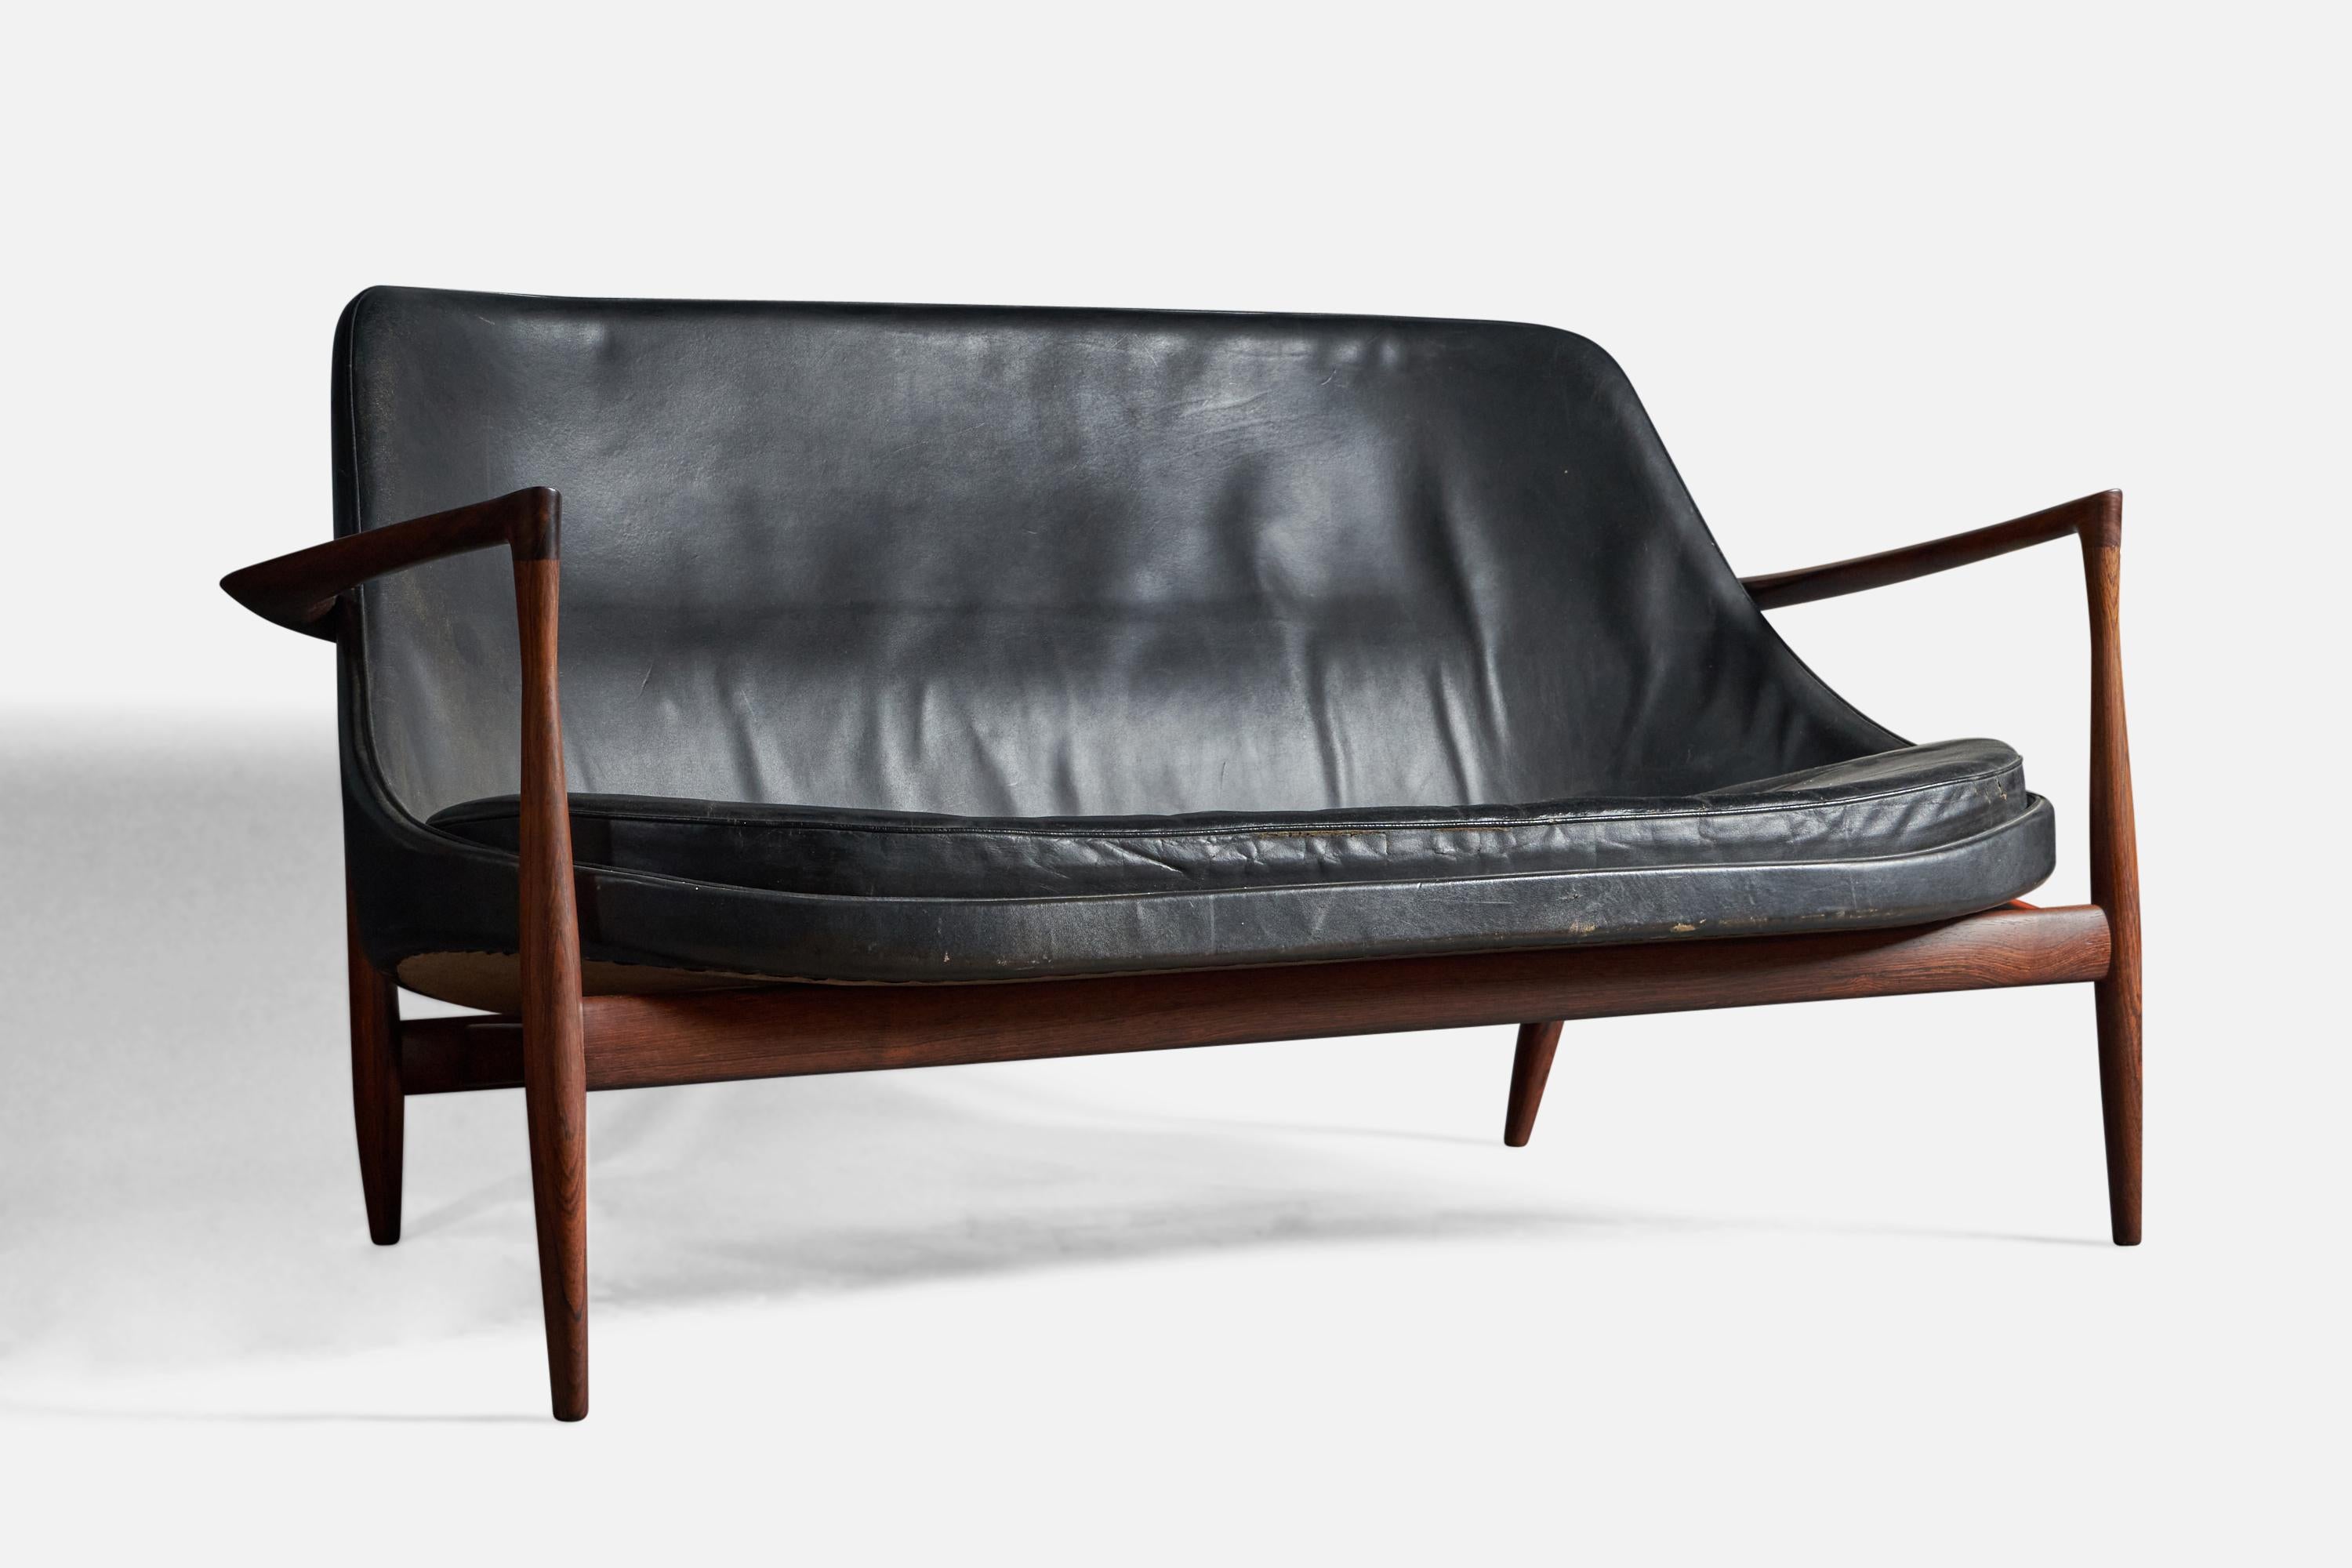 A black leather and rosewood settee, designed by Ib Kofod-Larsen and produced by Christensen & Larsen, Denmark, 1950s.
